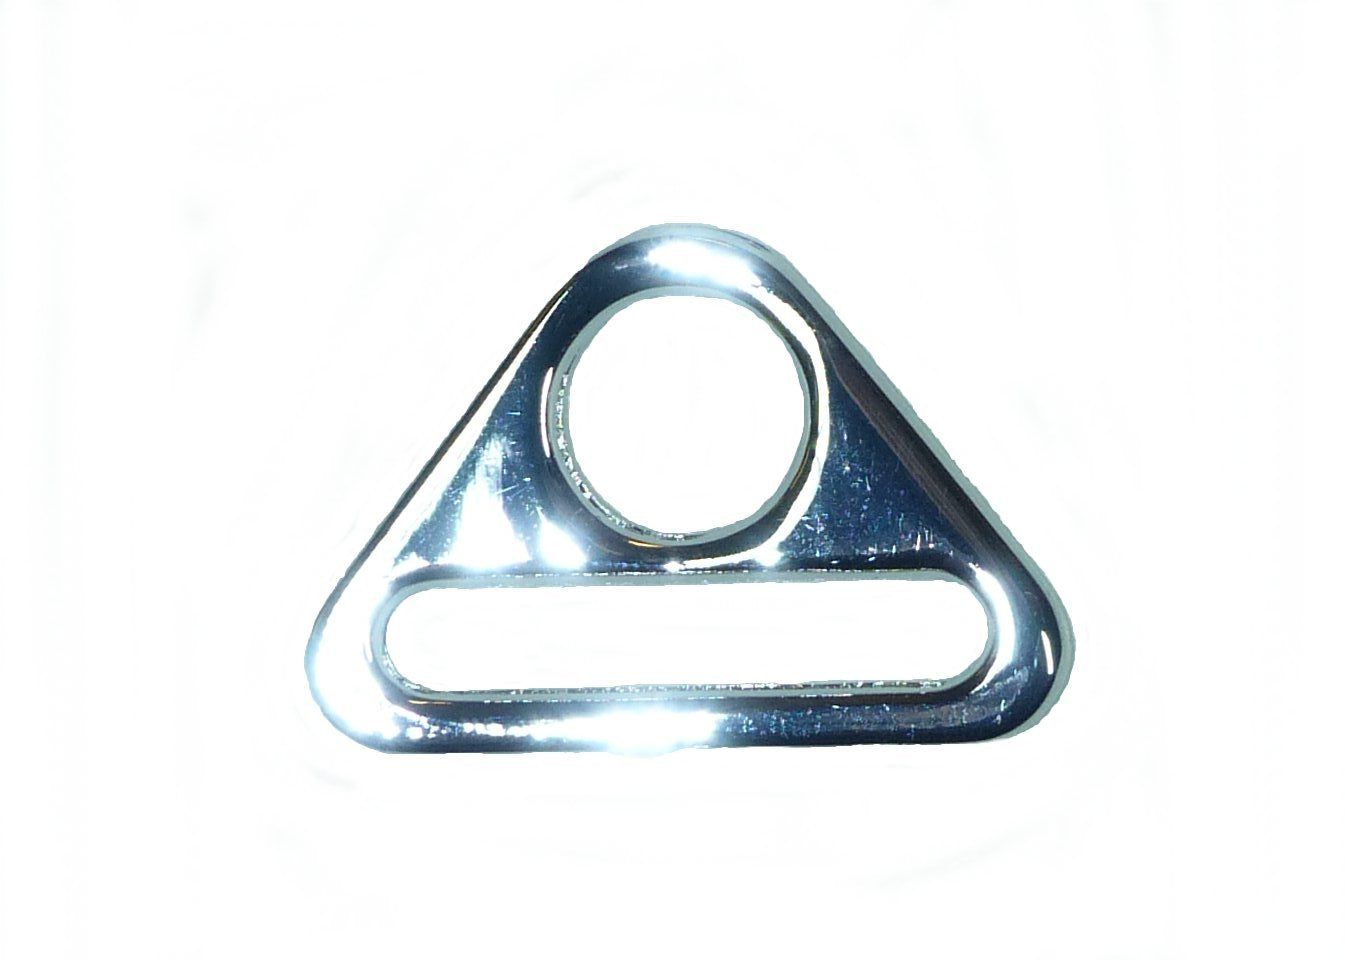 Benristraps 25mm alloy strong triangle with slot and hole